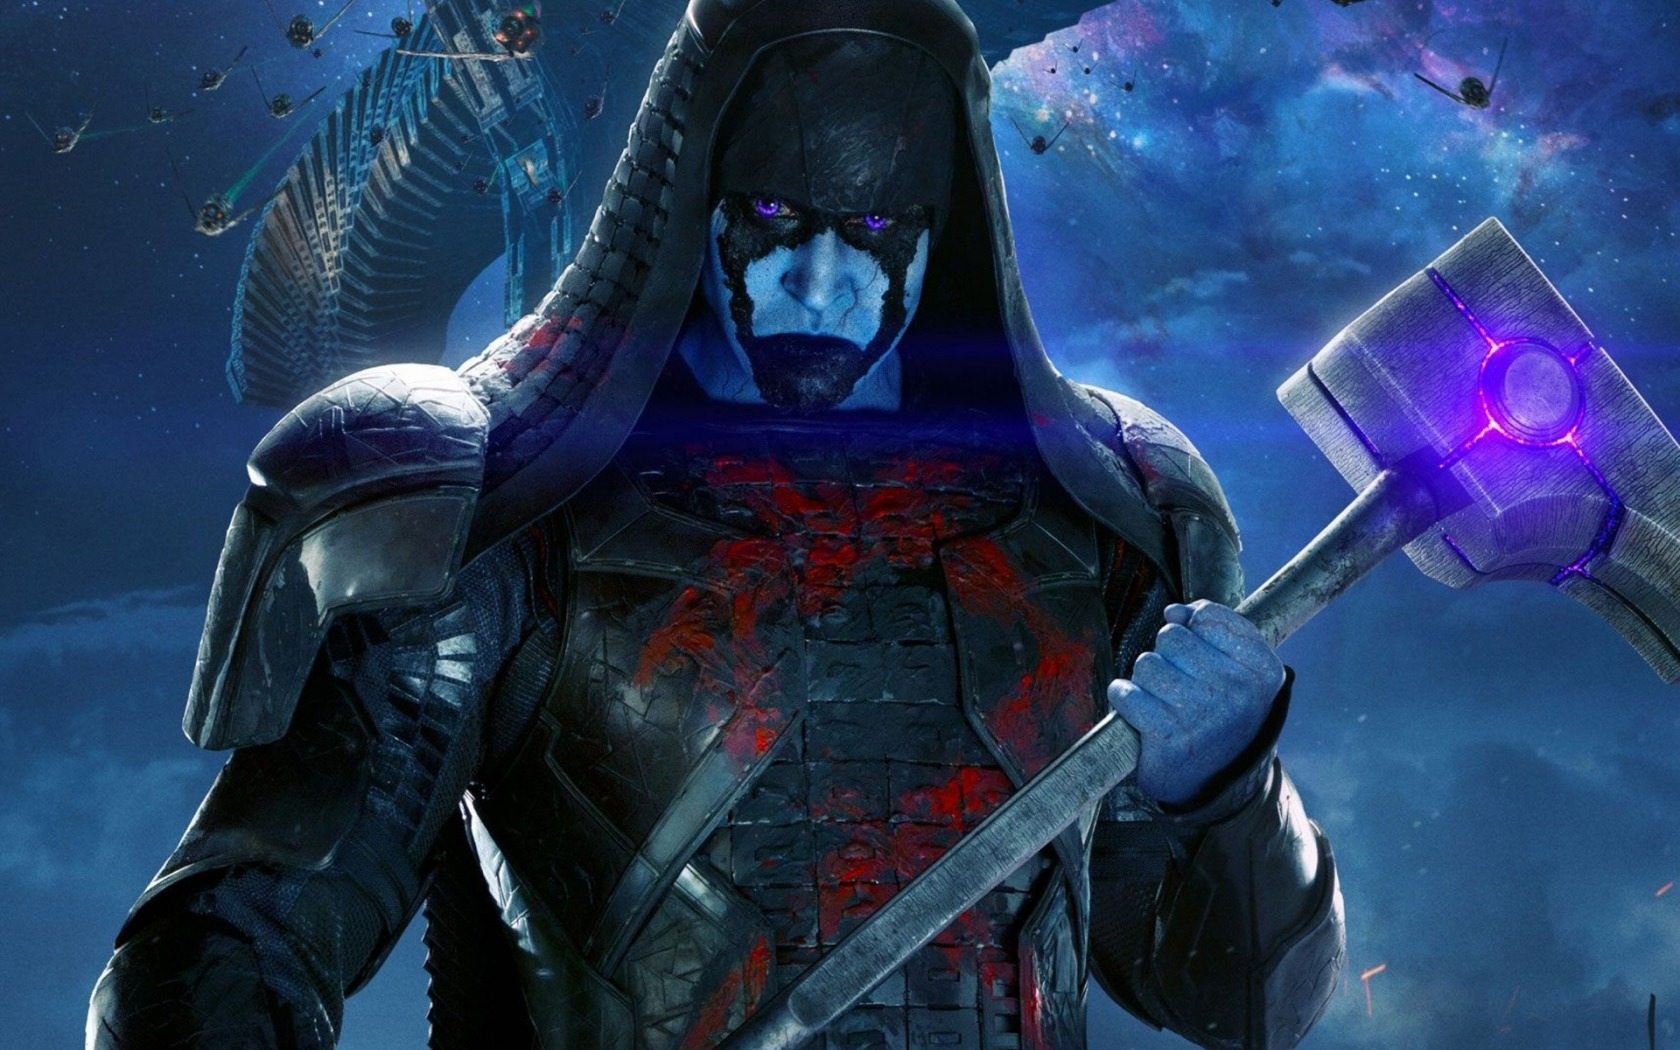 The Marvel Cinematic Villains: What Makes a Memorable Antagonist? | The